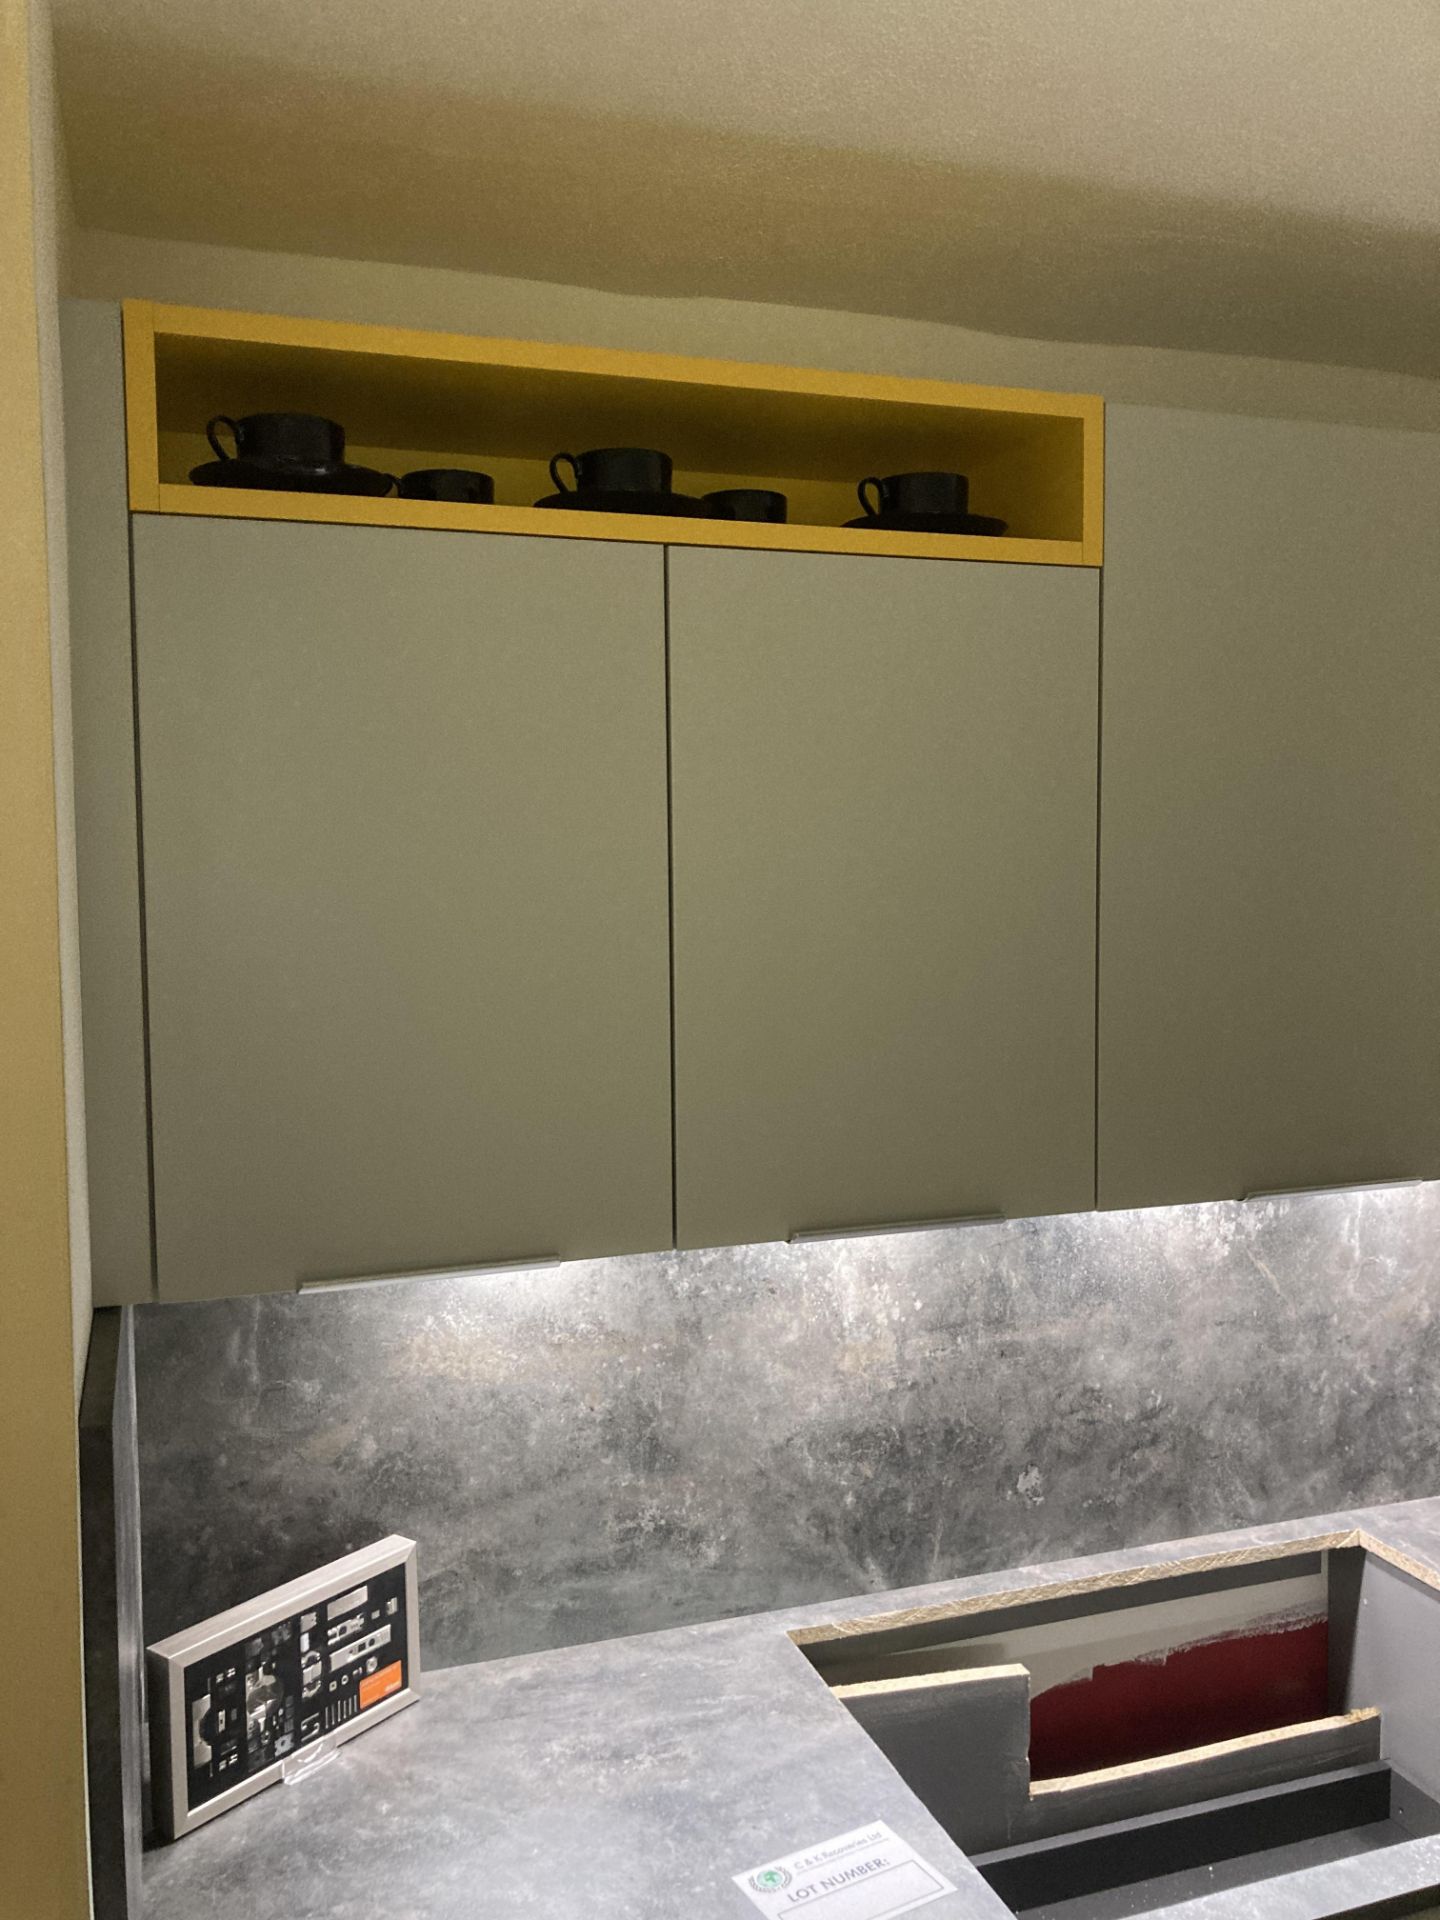 Grey with yellow open units kitchen display with appliances - Image 3 of 10